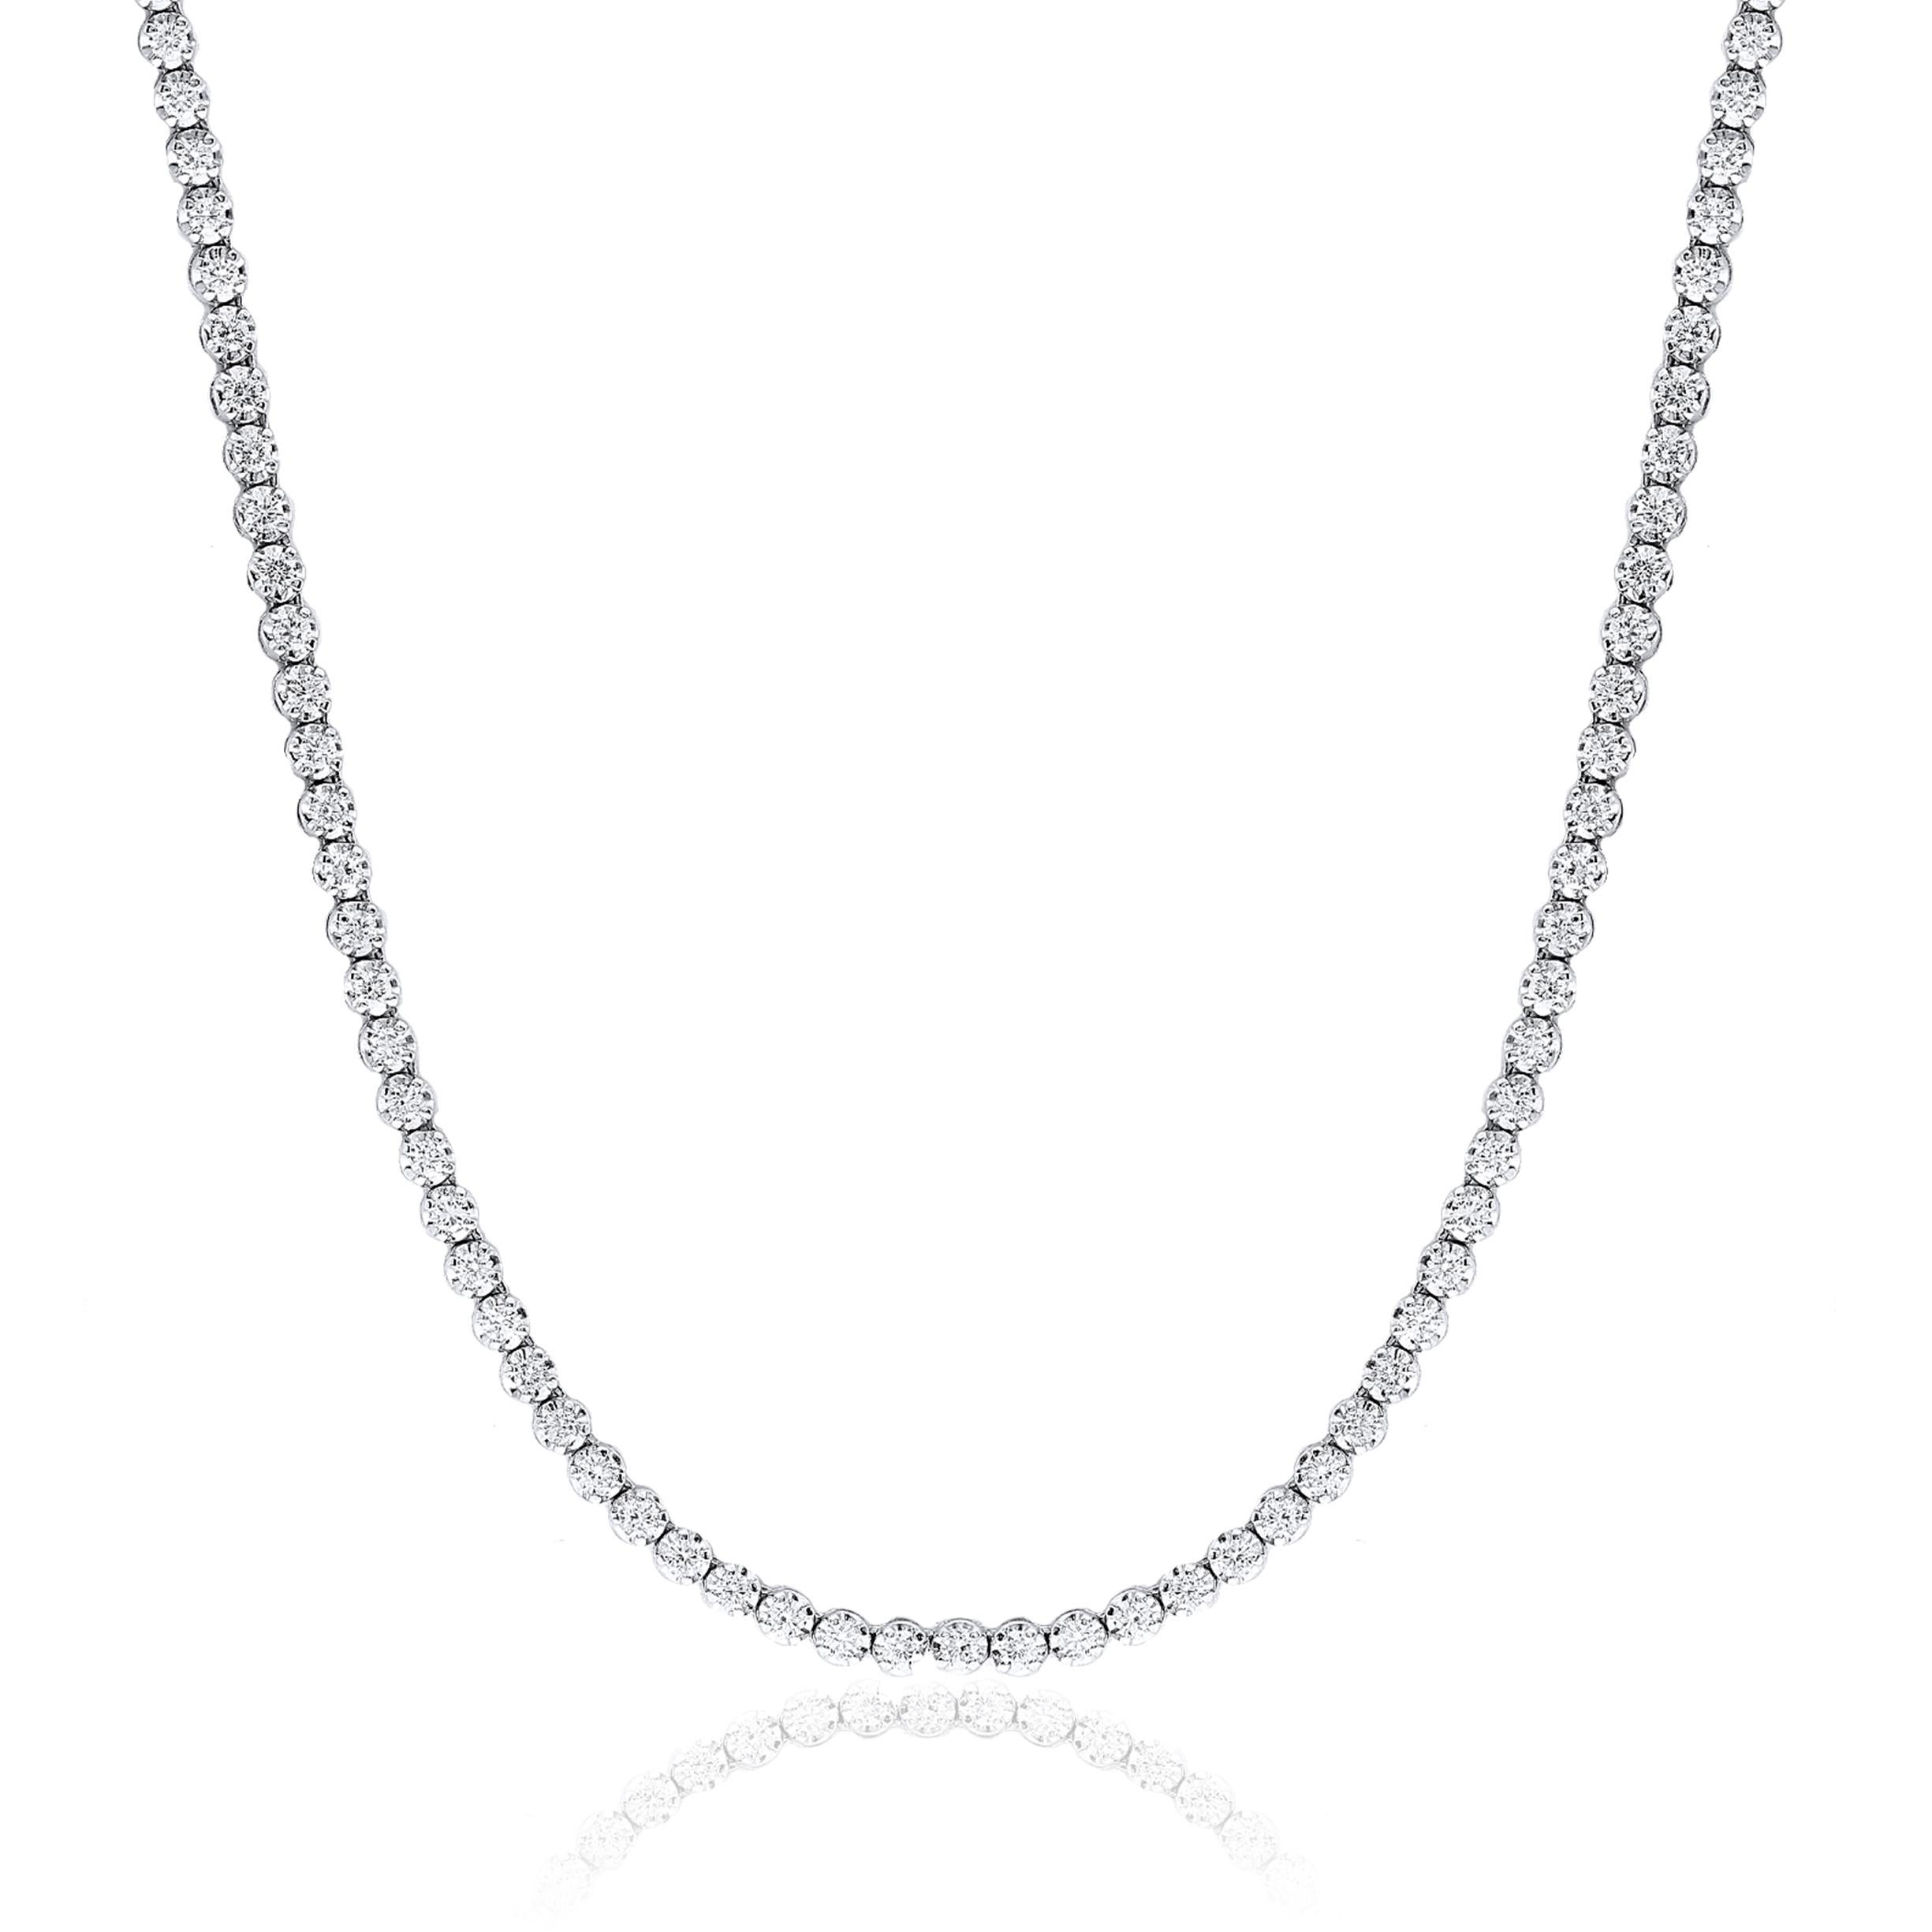 A classic and timeless tennis necklace showcasing 137 round brilliant diamonds set all over in a bezel made in 14k white gold. Diamonds weigh 4 carats total.
Style available in different price ranges. Prices are based on your selection. Please